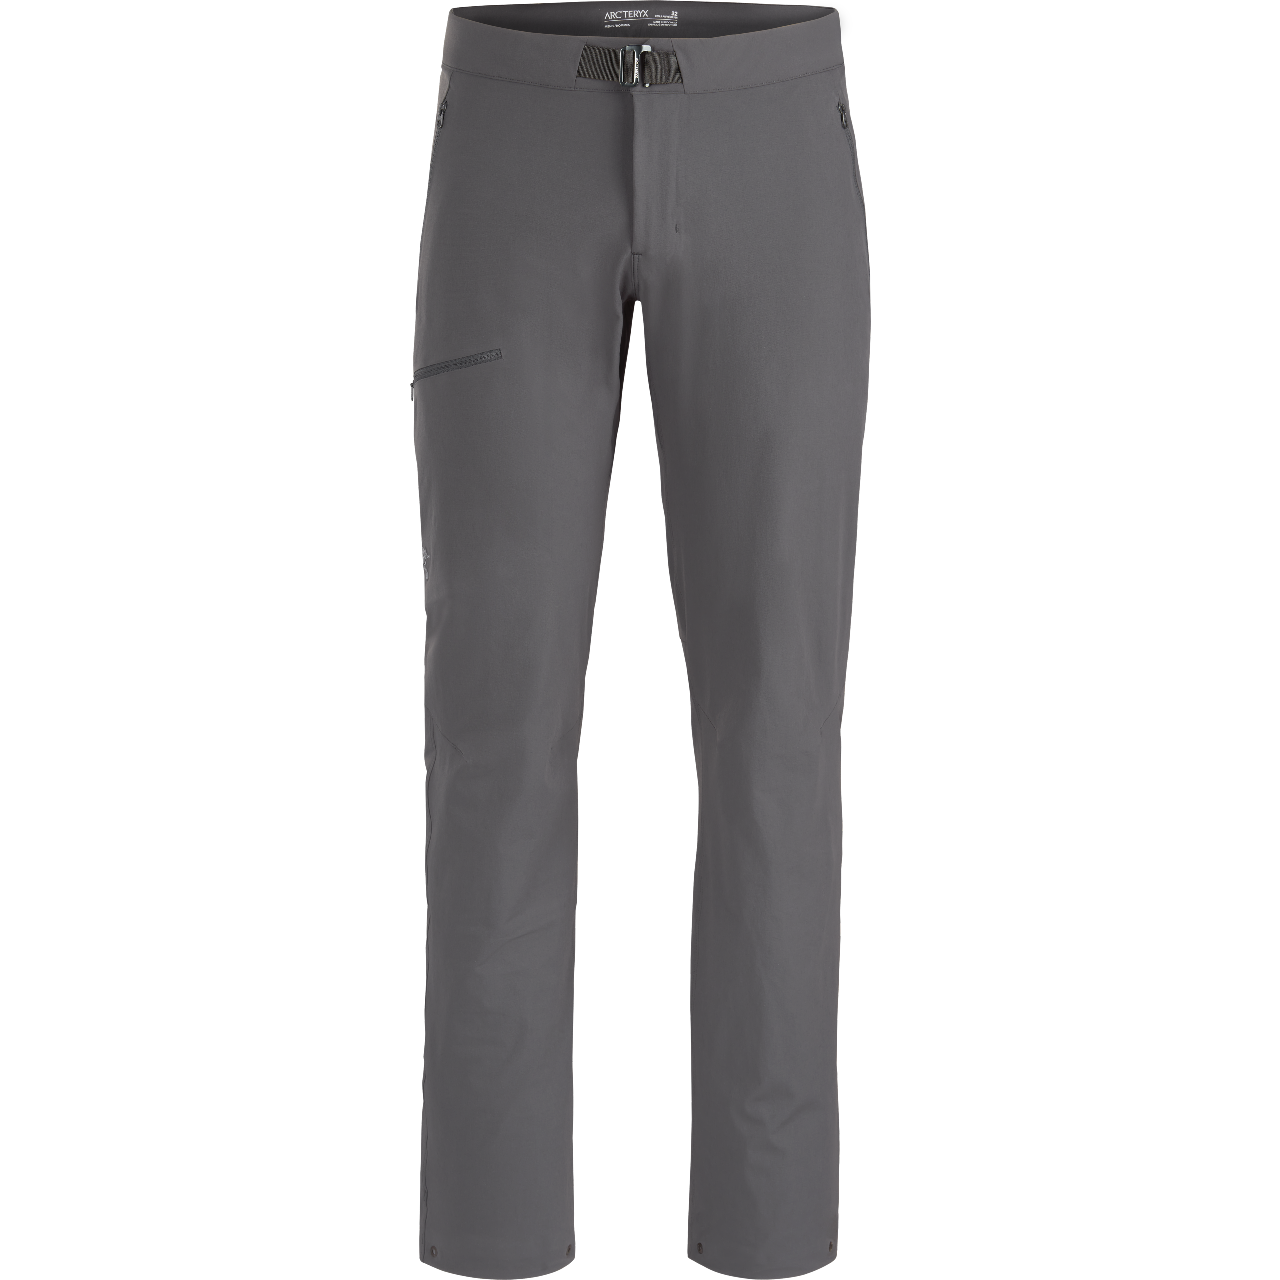 Gamma LT, the most versatile pant out there? : r/arcteryx